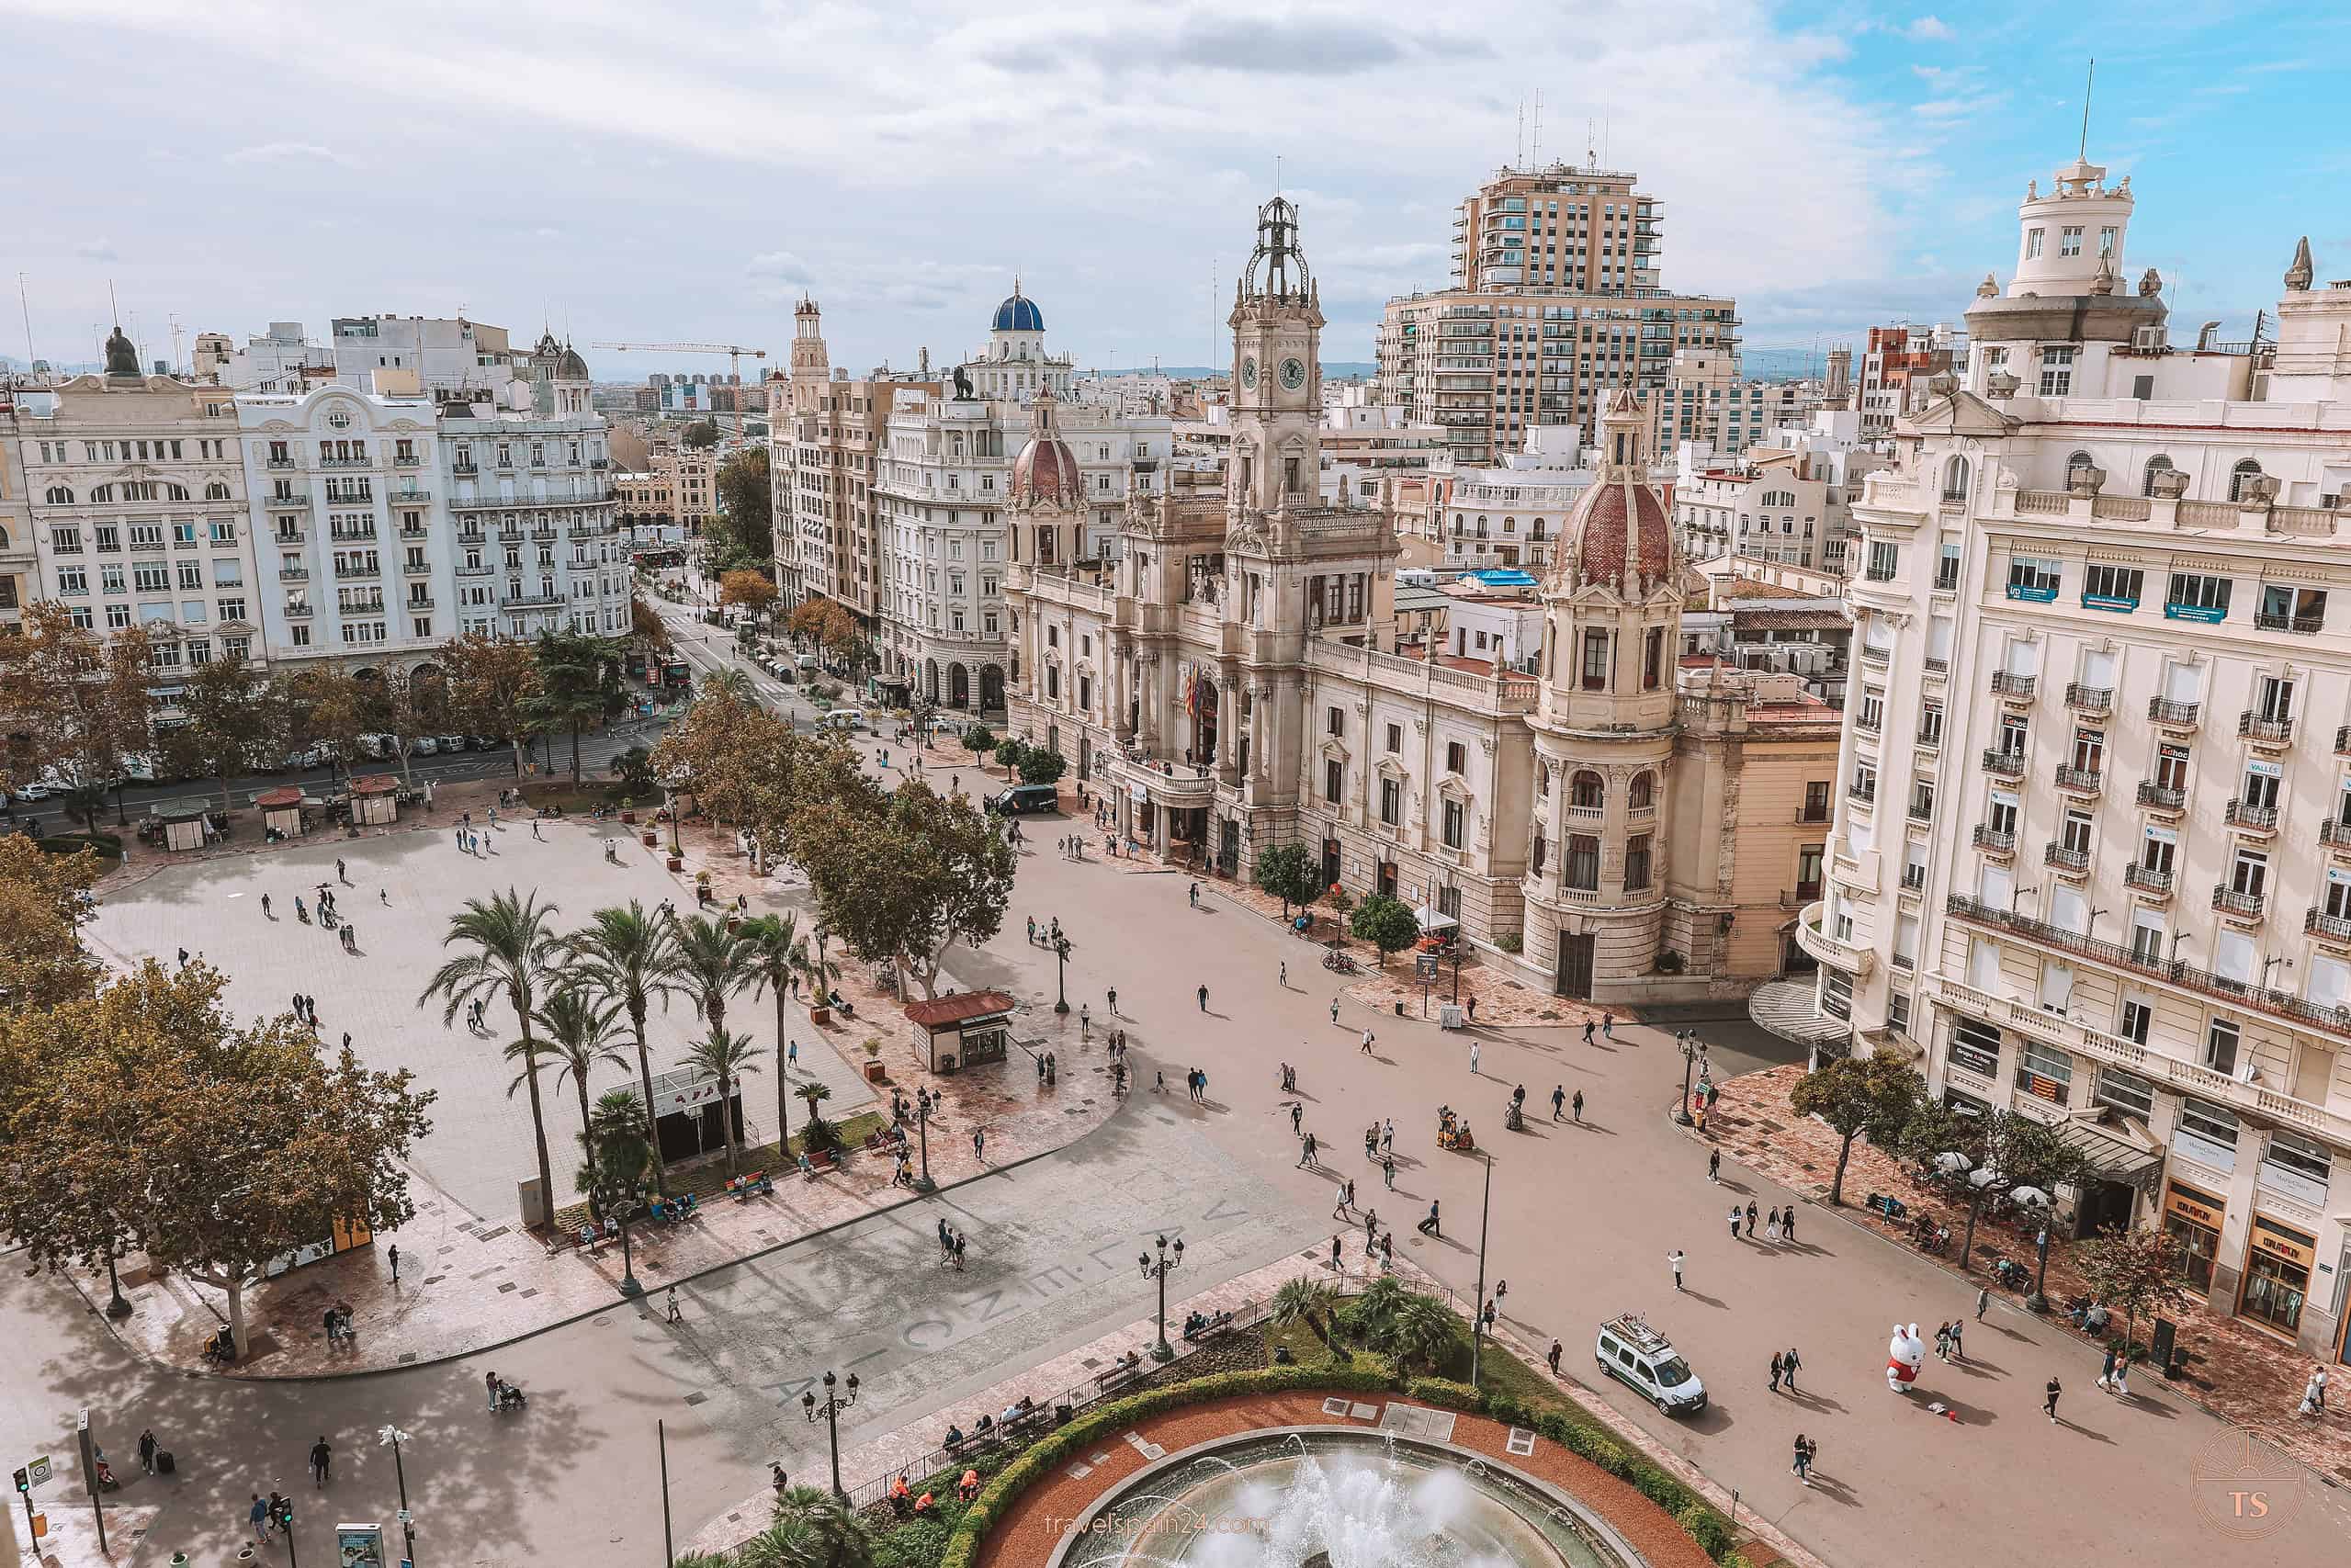 Panoramic view from Atenea Sky Rooftop over Plaza del Ayuntamiento, showcasing the bustling square, its iconic fountain, and the crowd below